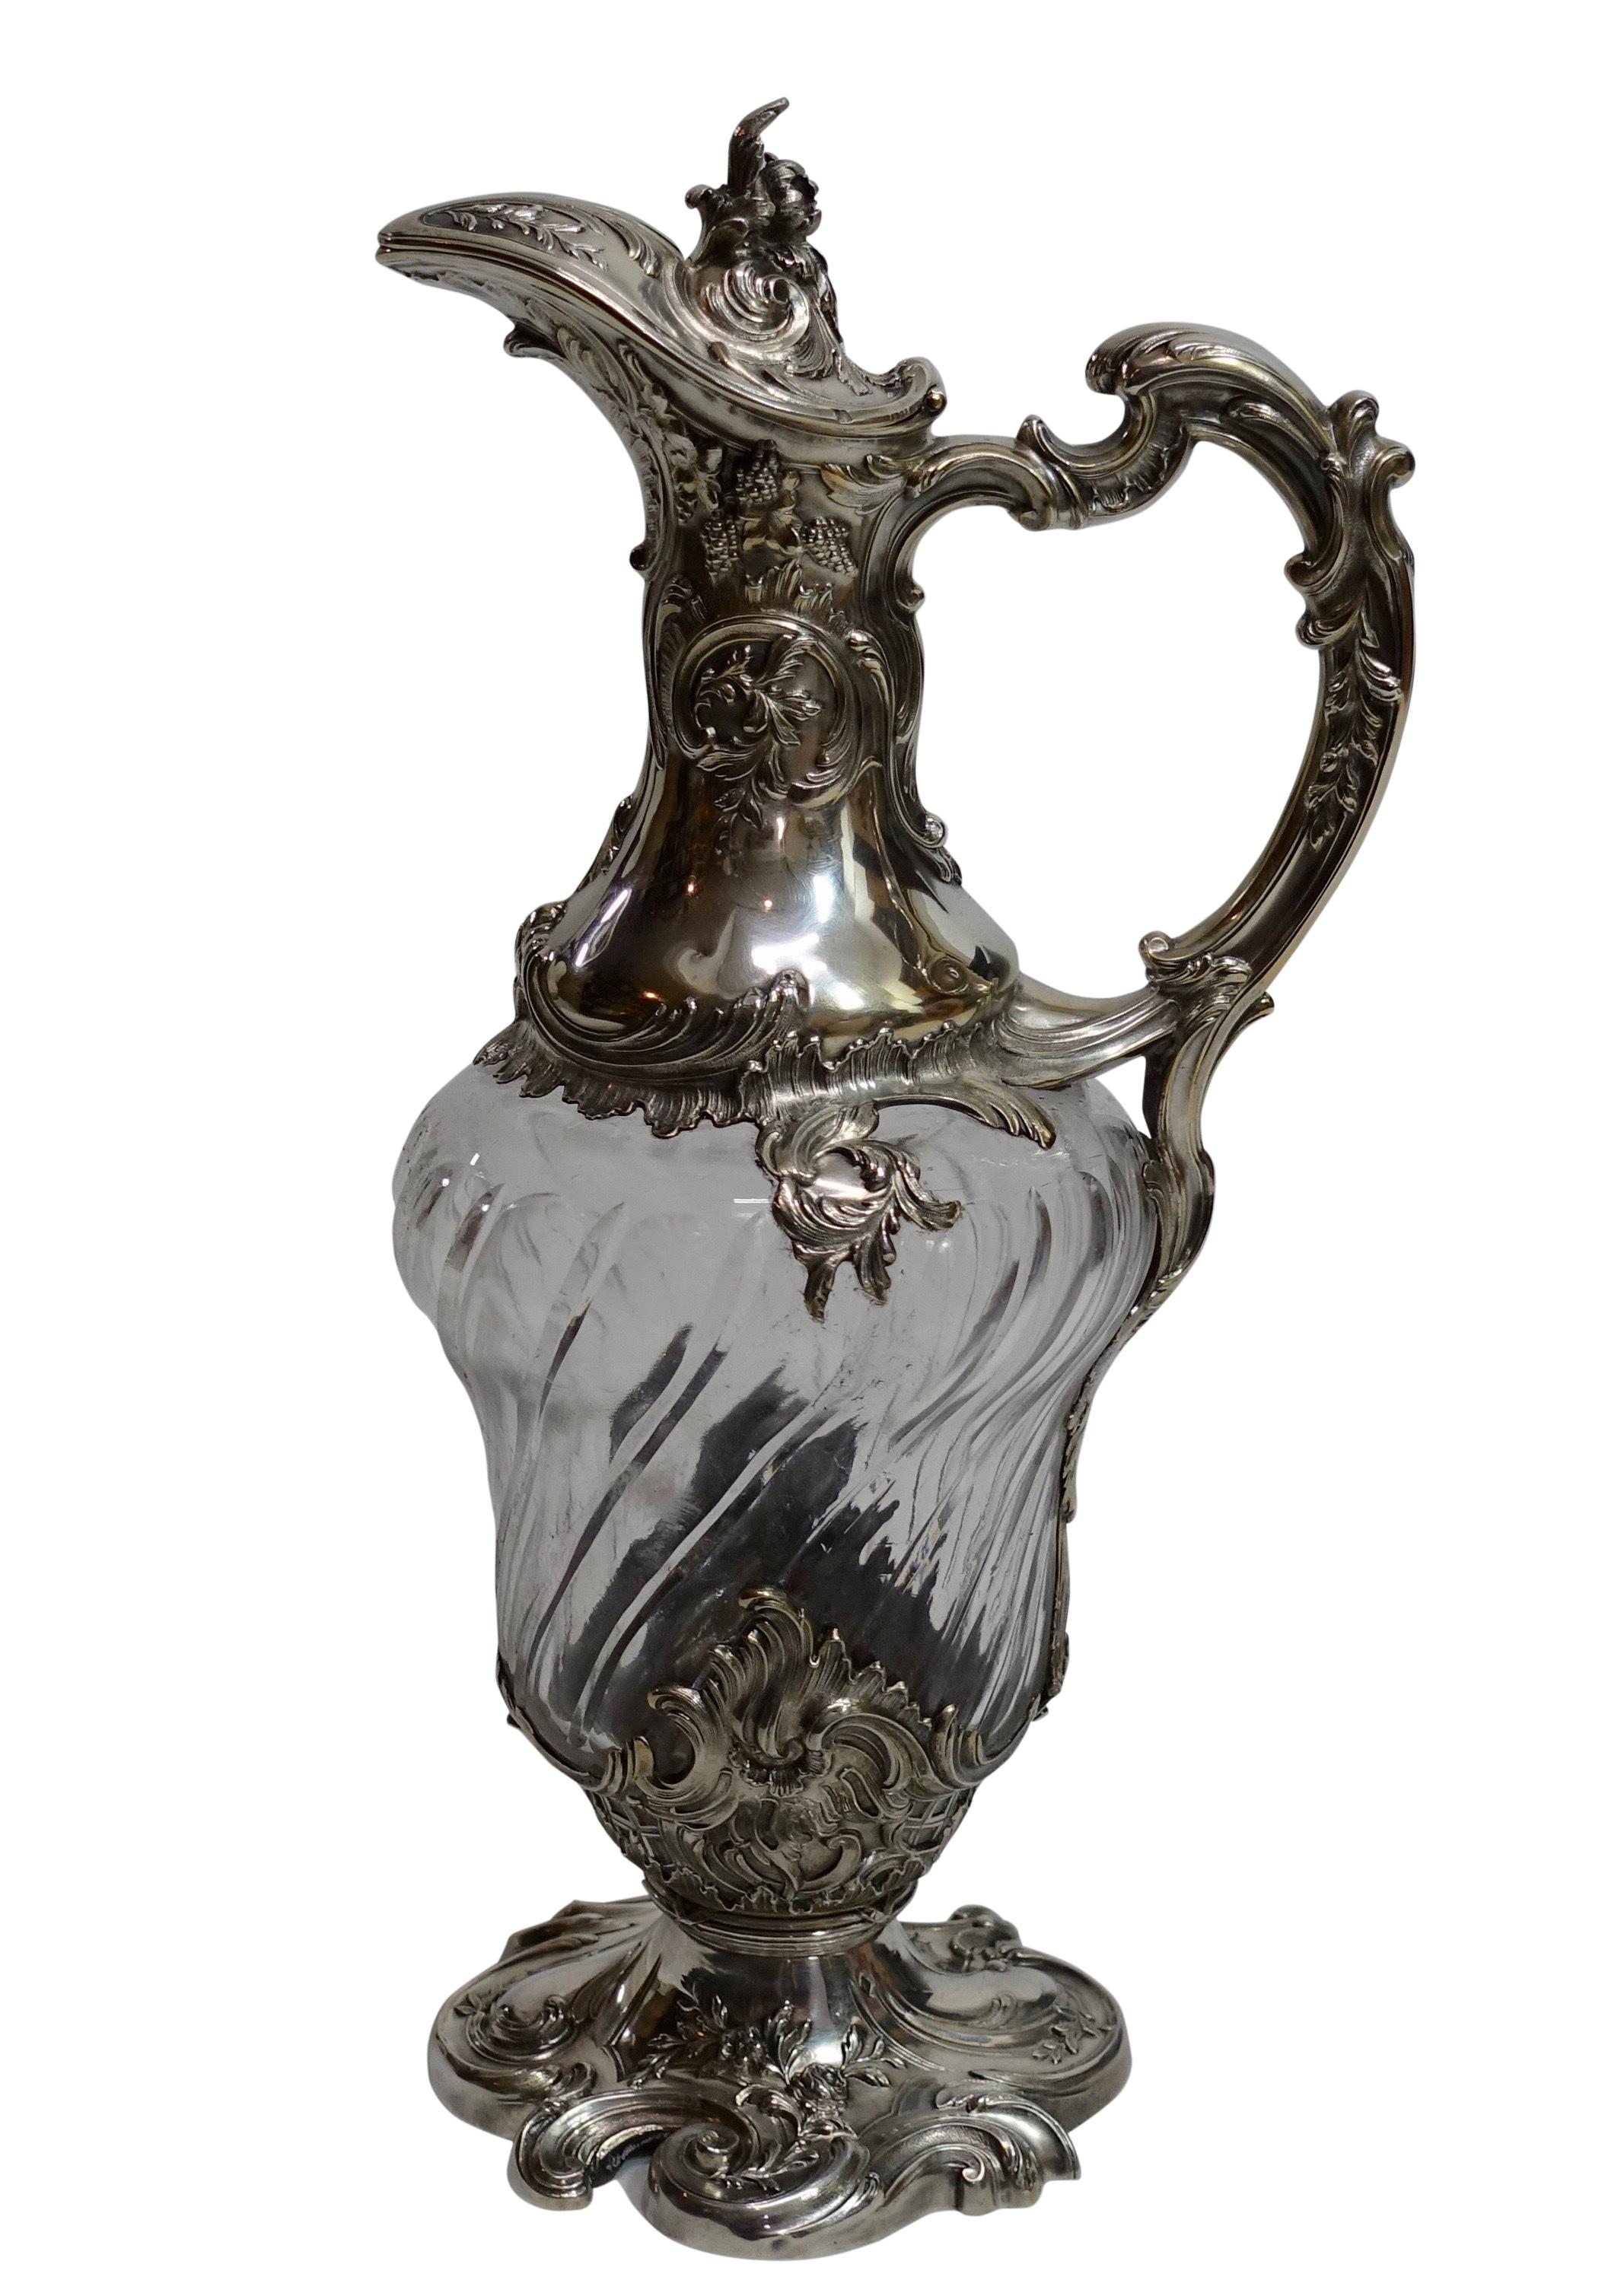 A cut glass claret pitcher with ornate sterling mounts in the Louis XVI style.